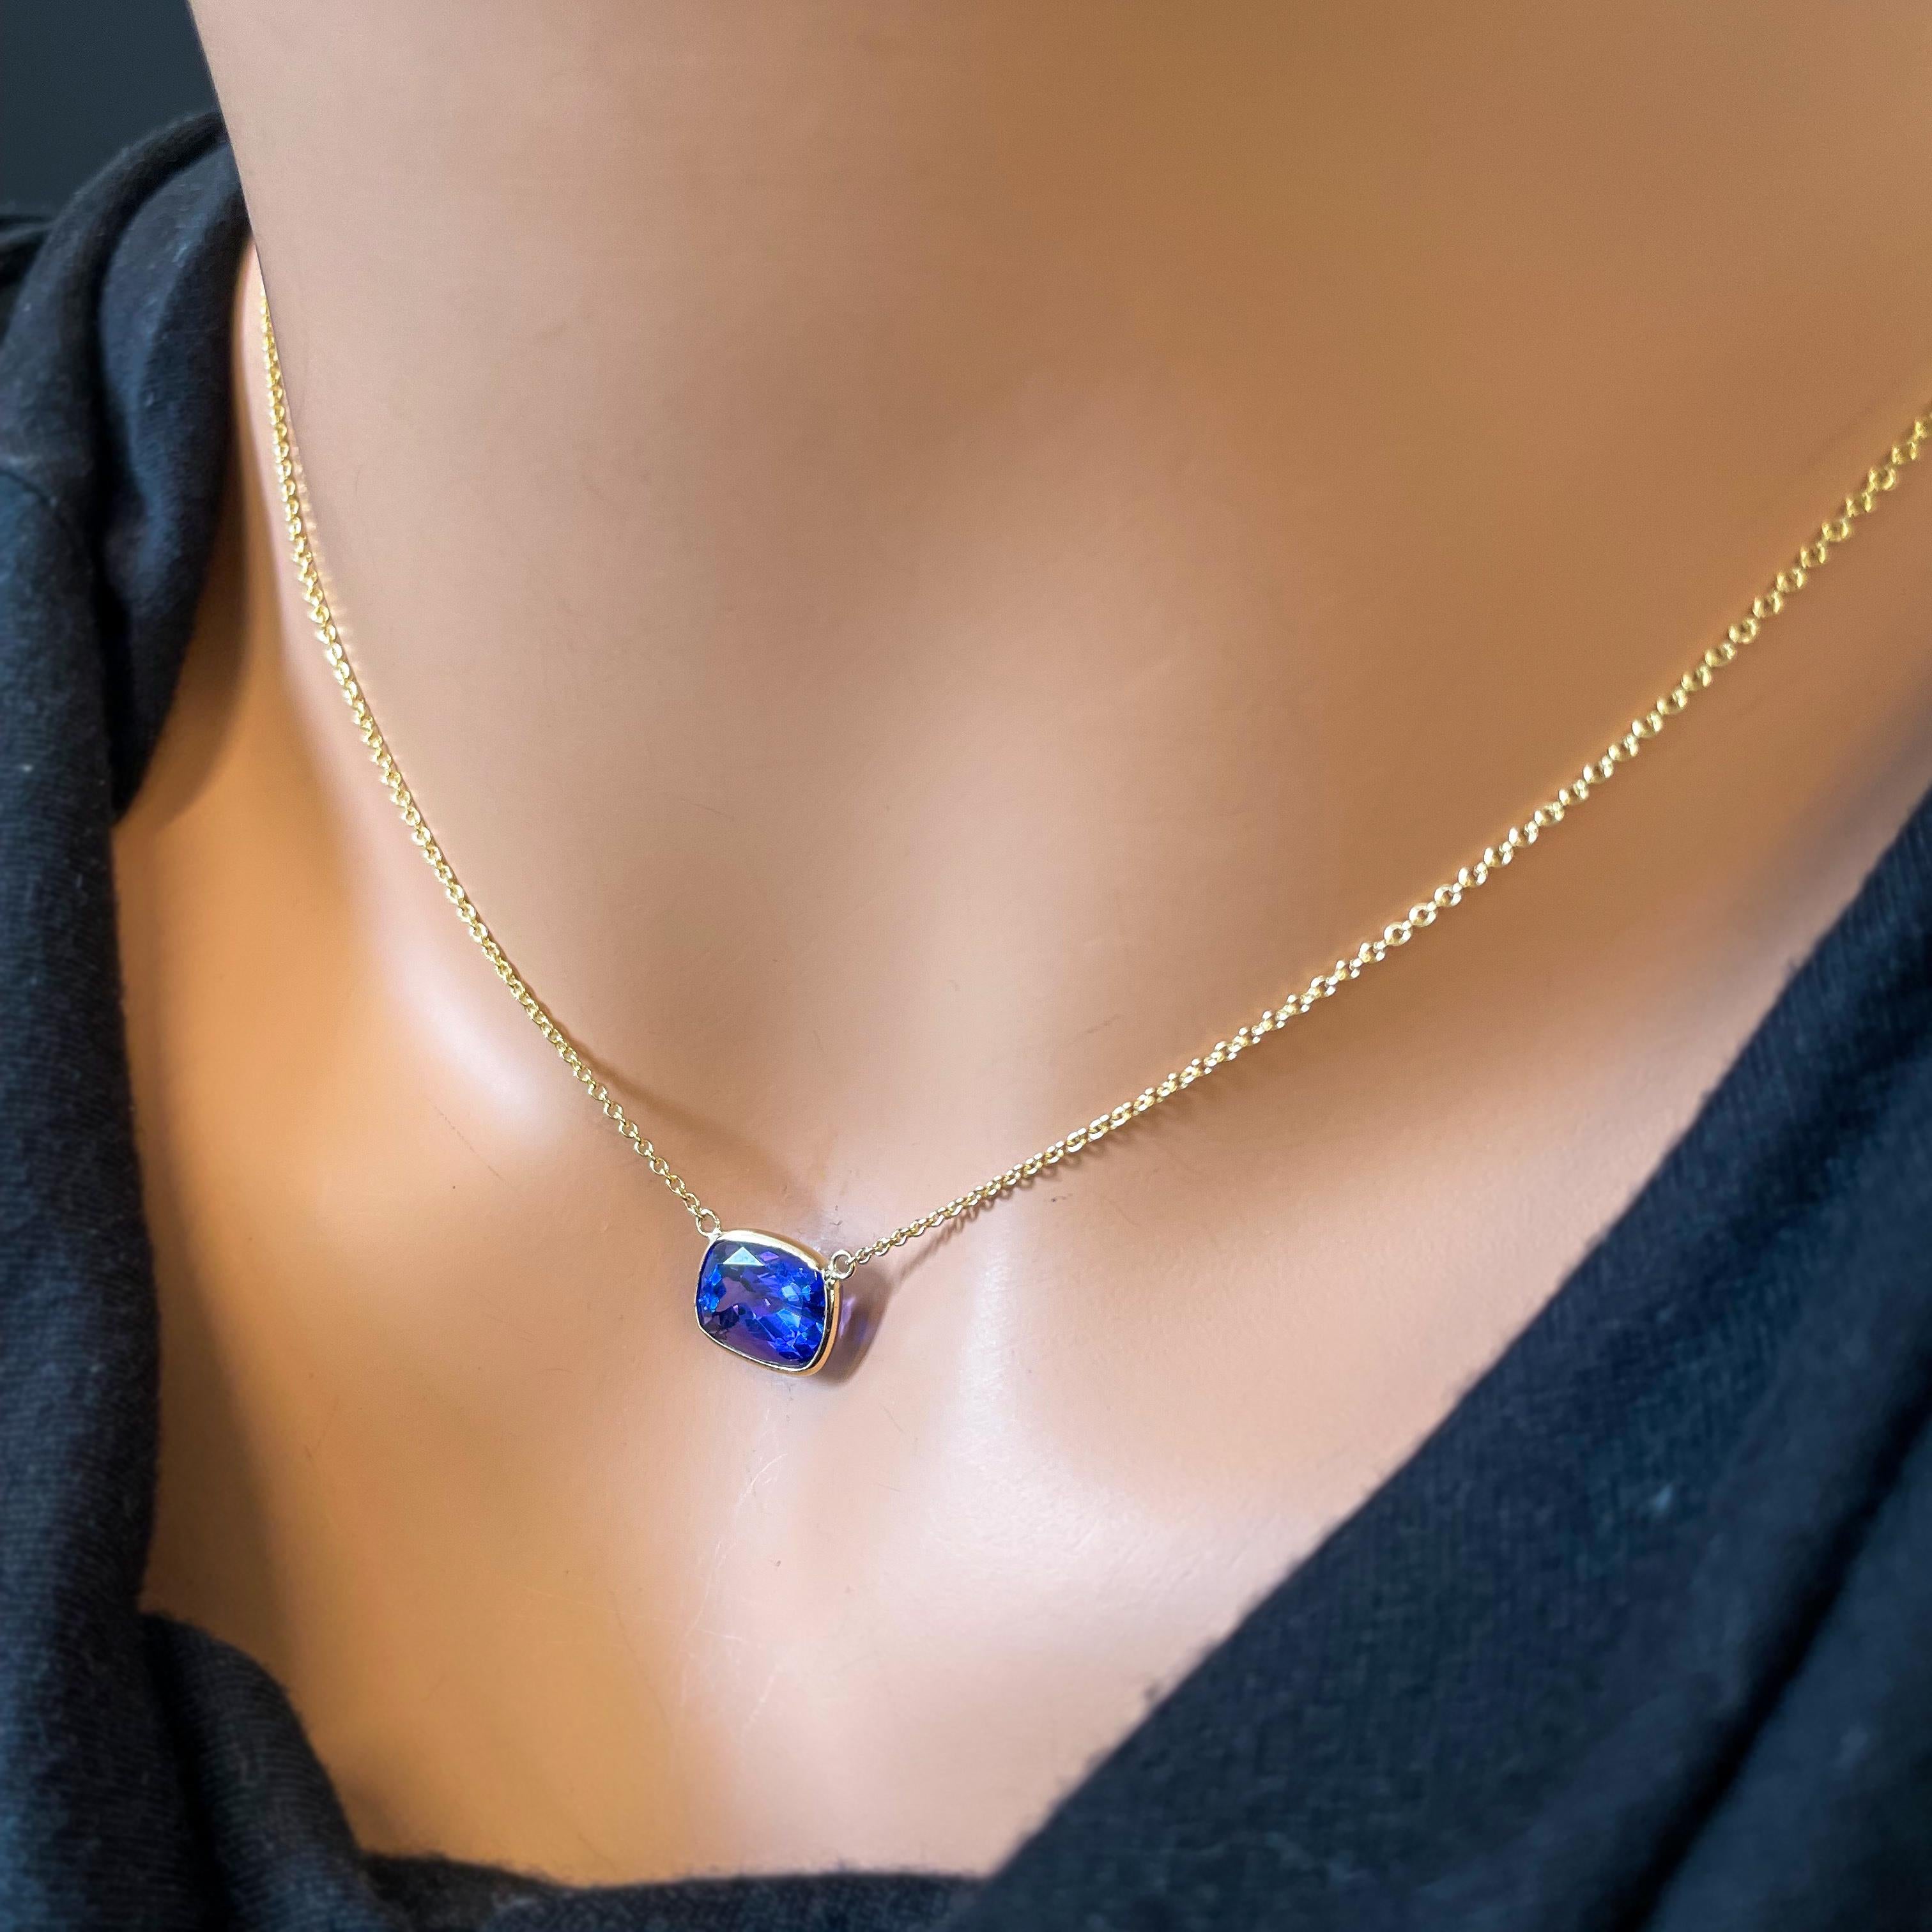 Main stone being a 4.25 carat cushion-cut Tanzanite set in 14k yellow gold (YG). Tanzanite is a beautiful blue-violet gemstone and is known for its striking color and elegance. A cushion cut is a popular choice for gemstones, providing a classic and